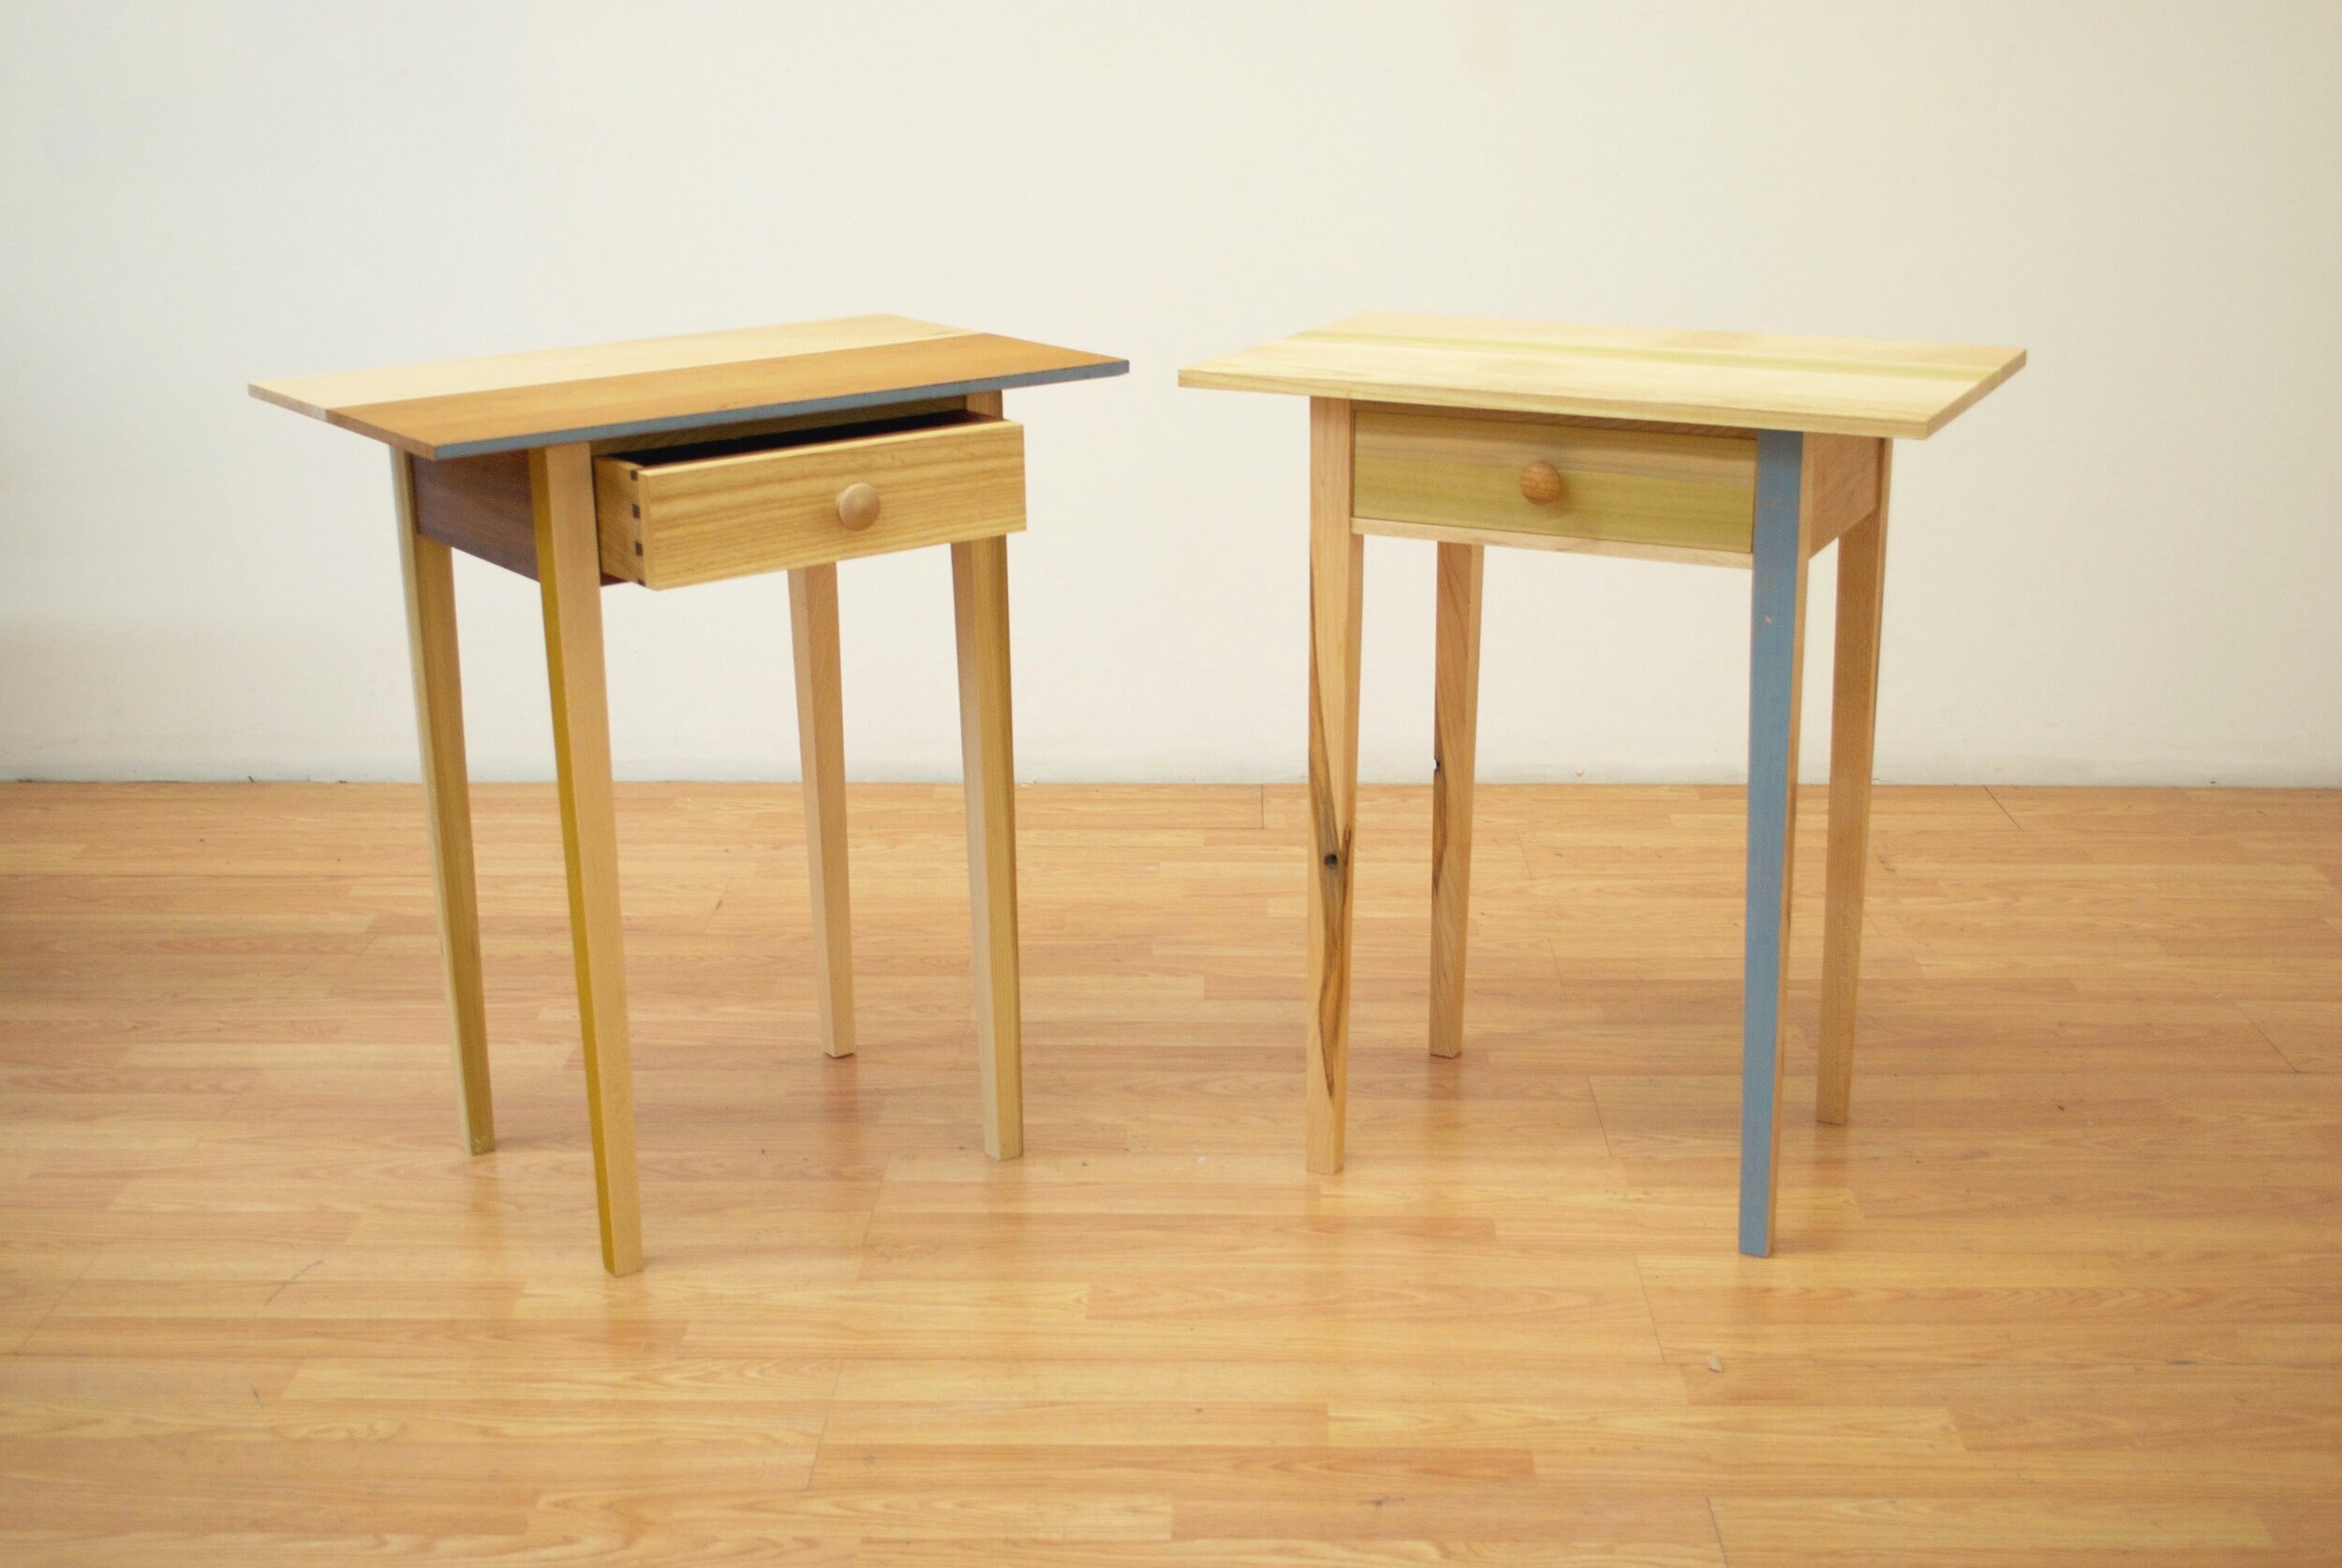 His/Hers Side Tables